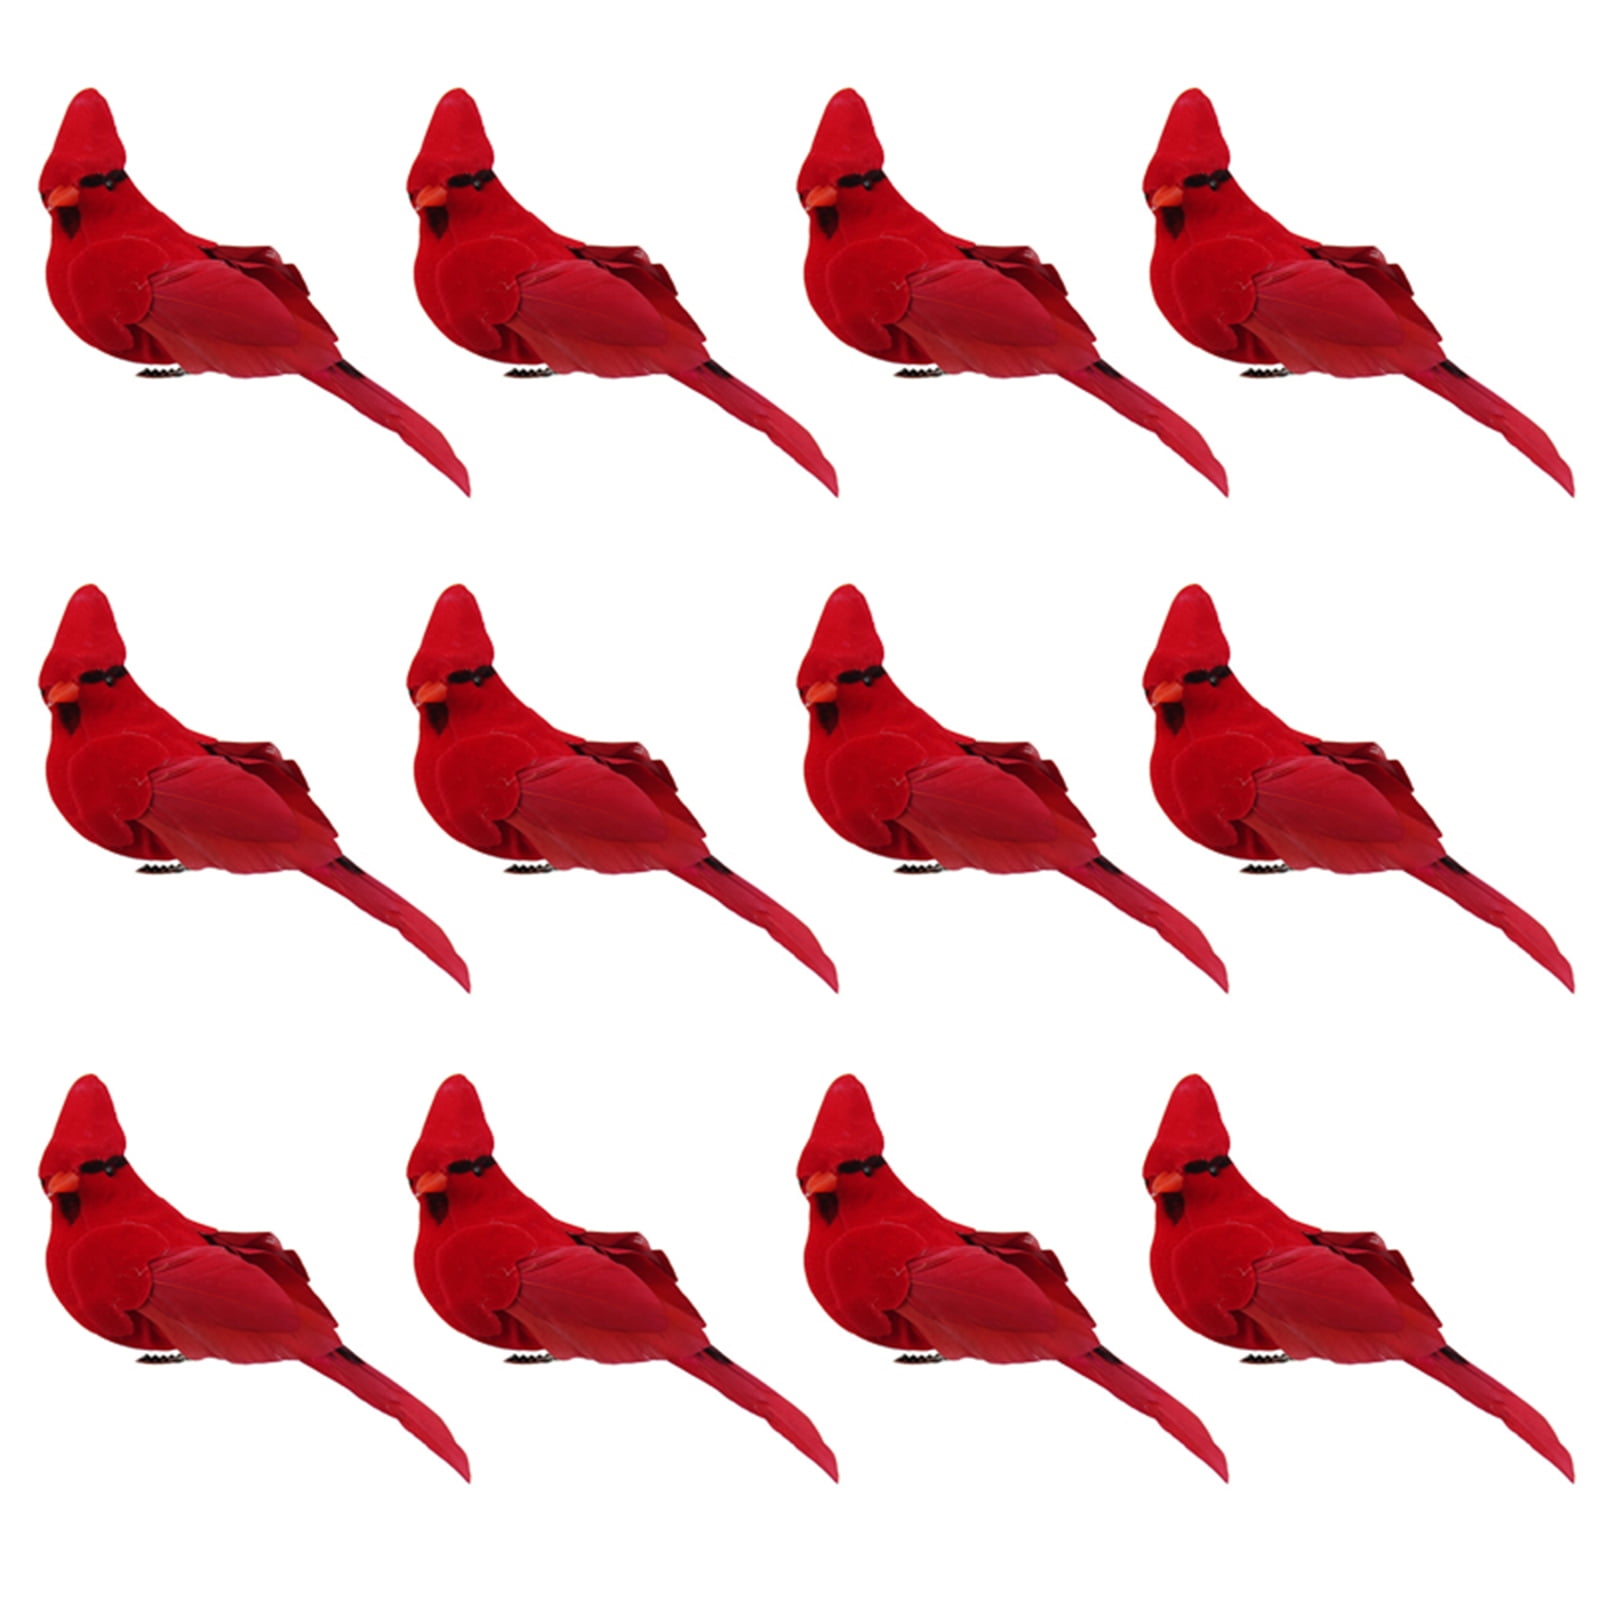 24pcs Simulated Foam Clip-on Birds for Home Lawn Party Ornament DIY Crafts 